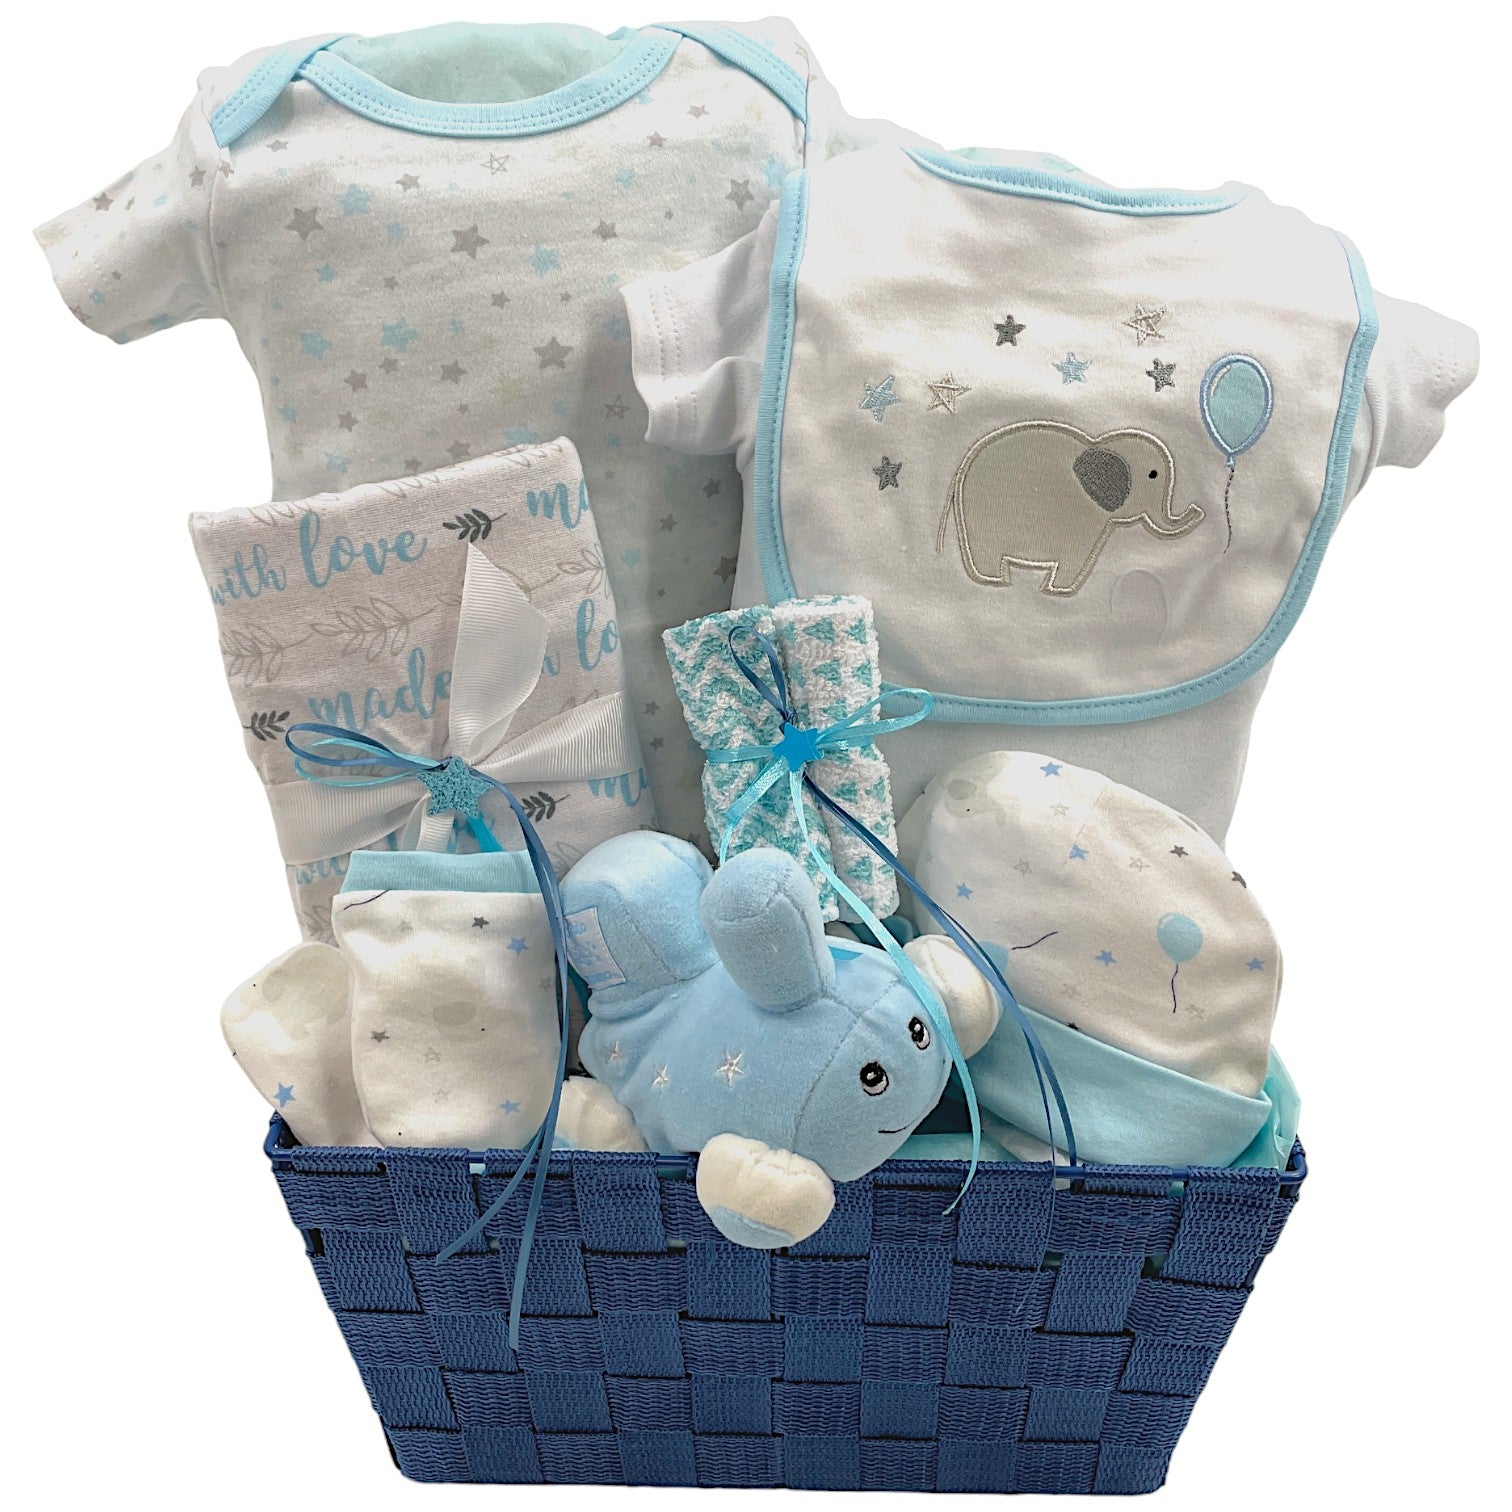 Welcome, Baby Boy Hamper – Lals - Chocolate and Gifting Brand in Pakistan